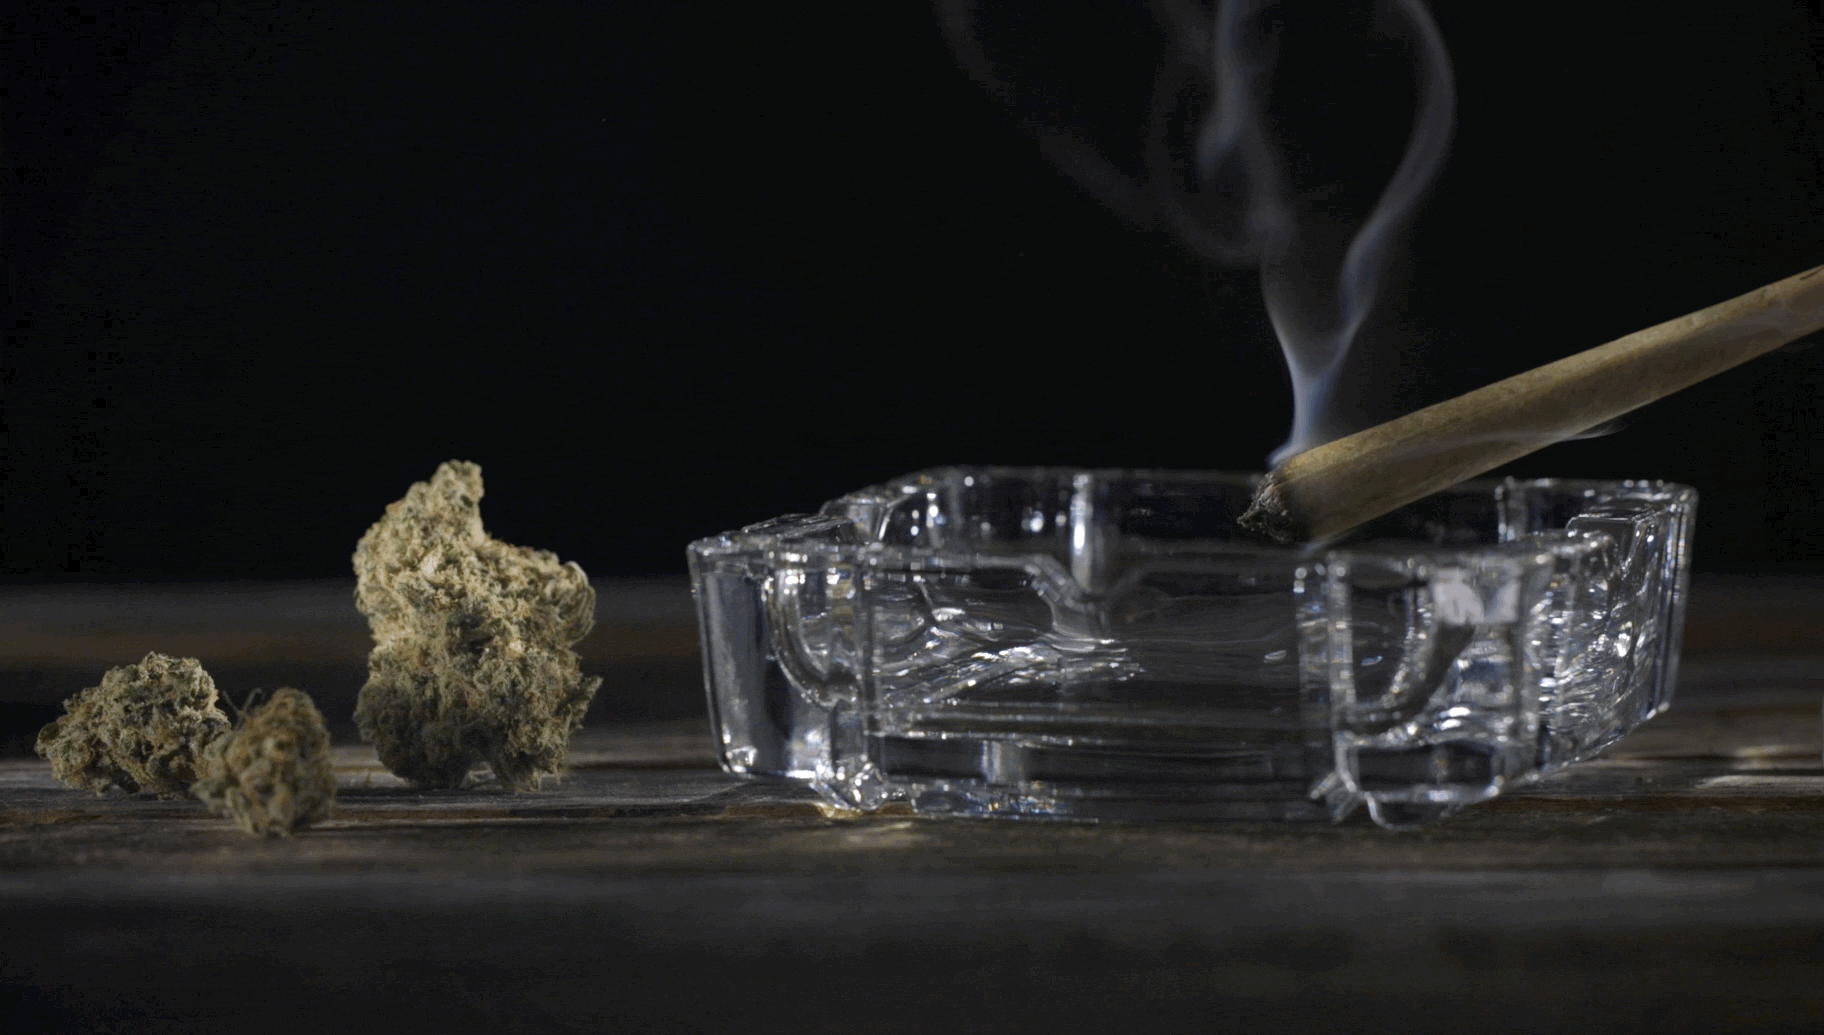 Digital 303 custom designed cinemagraph of a joint in ass tray. Join smoke rising into the air. 